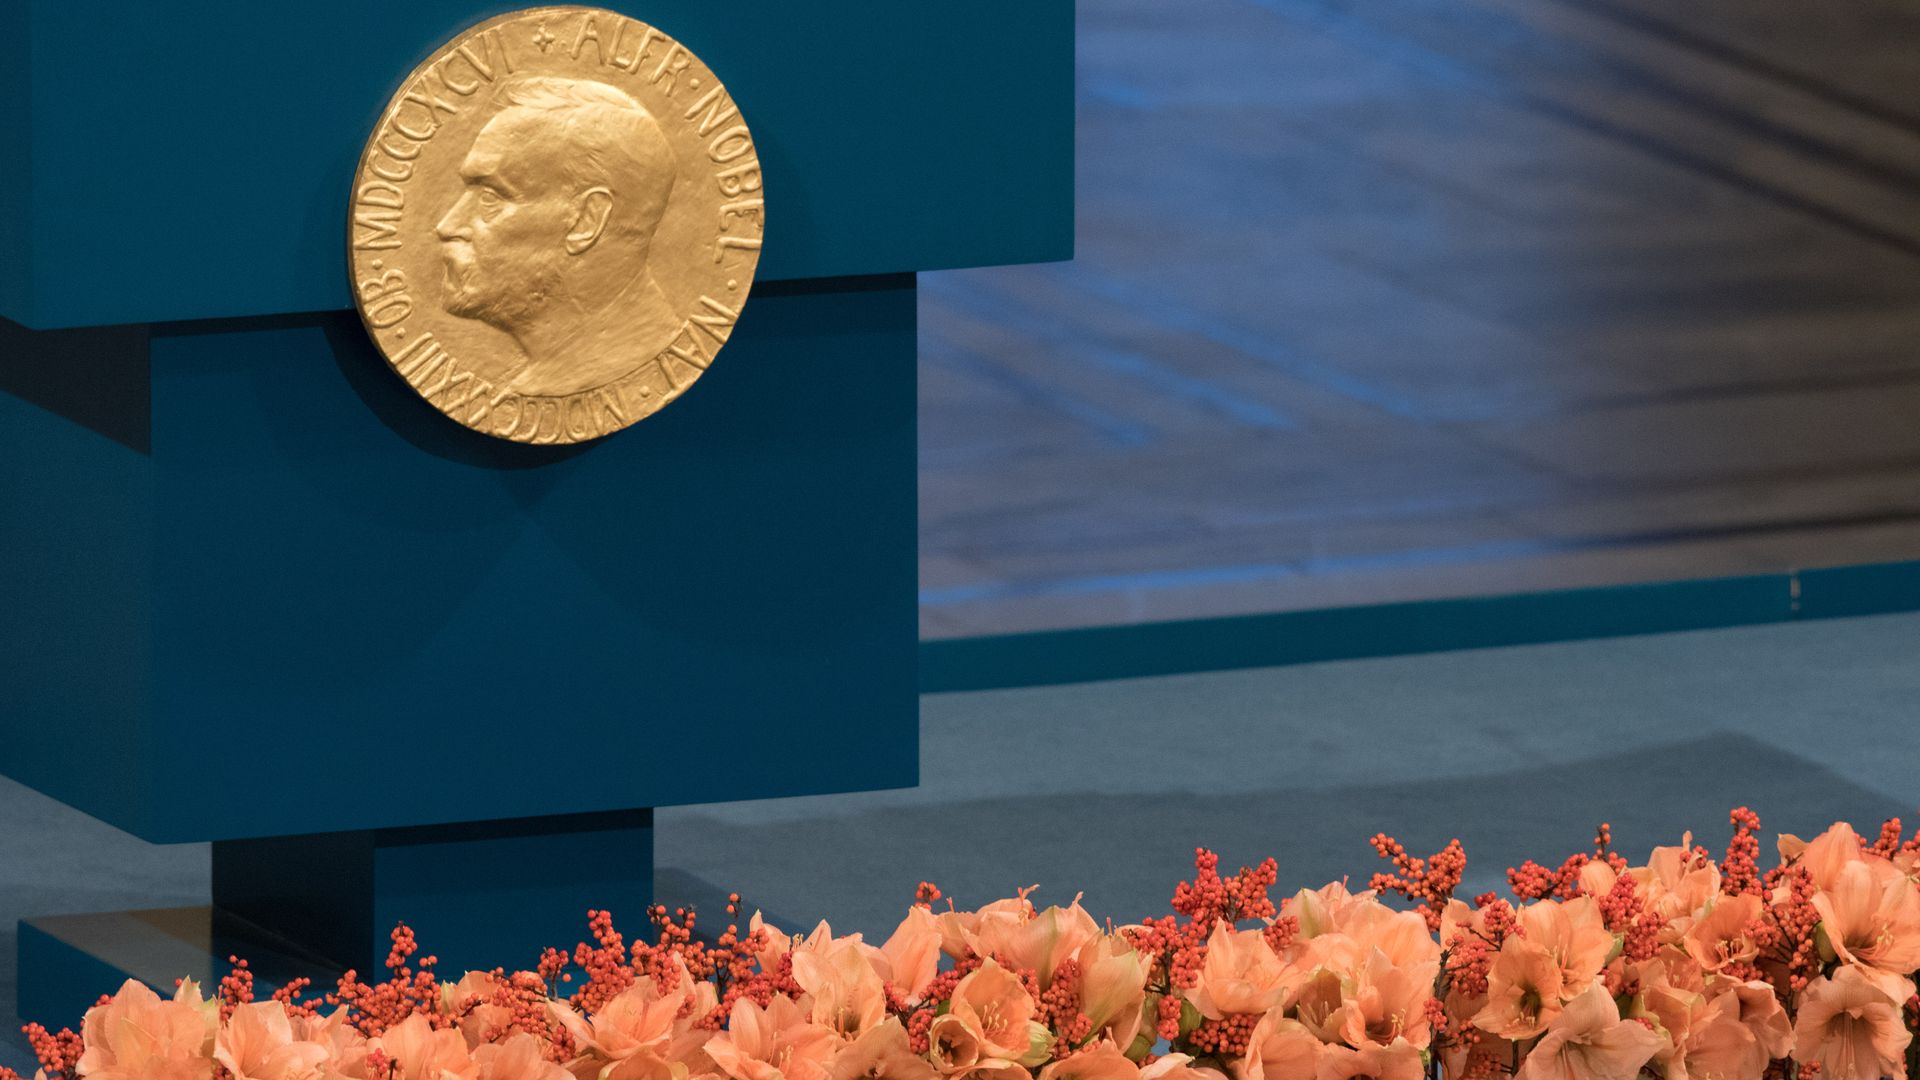 A plaque depicting Alfred Nobel adorns the lecturn prior to 2015 ceremony in Oslo, Norway.